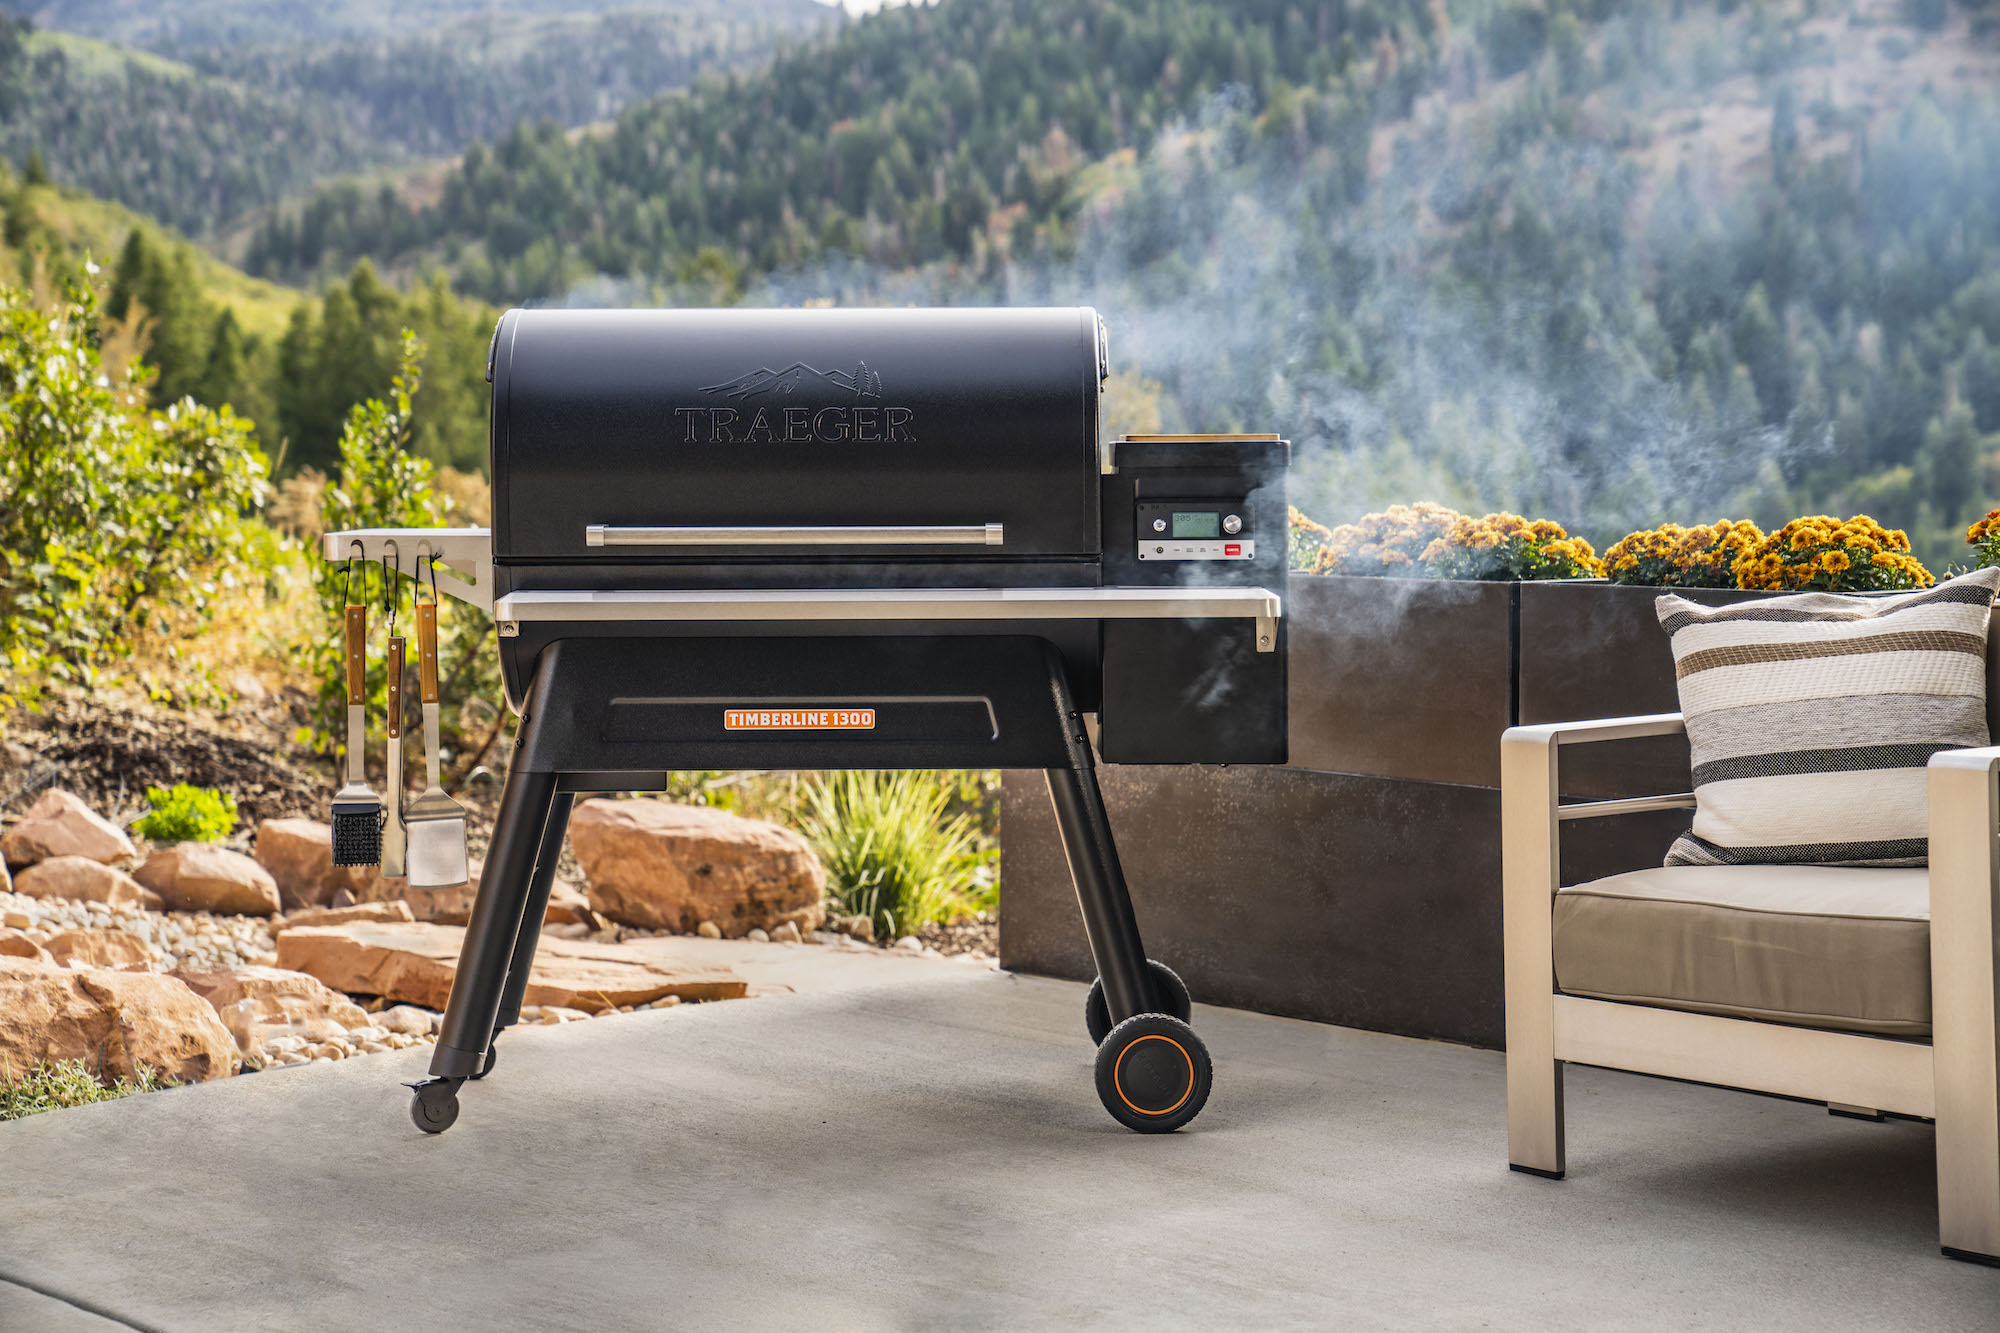 Camp Chef Flat Top Grill Review - Smoked BBQ Source